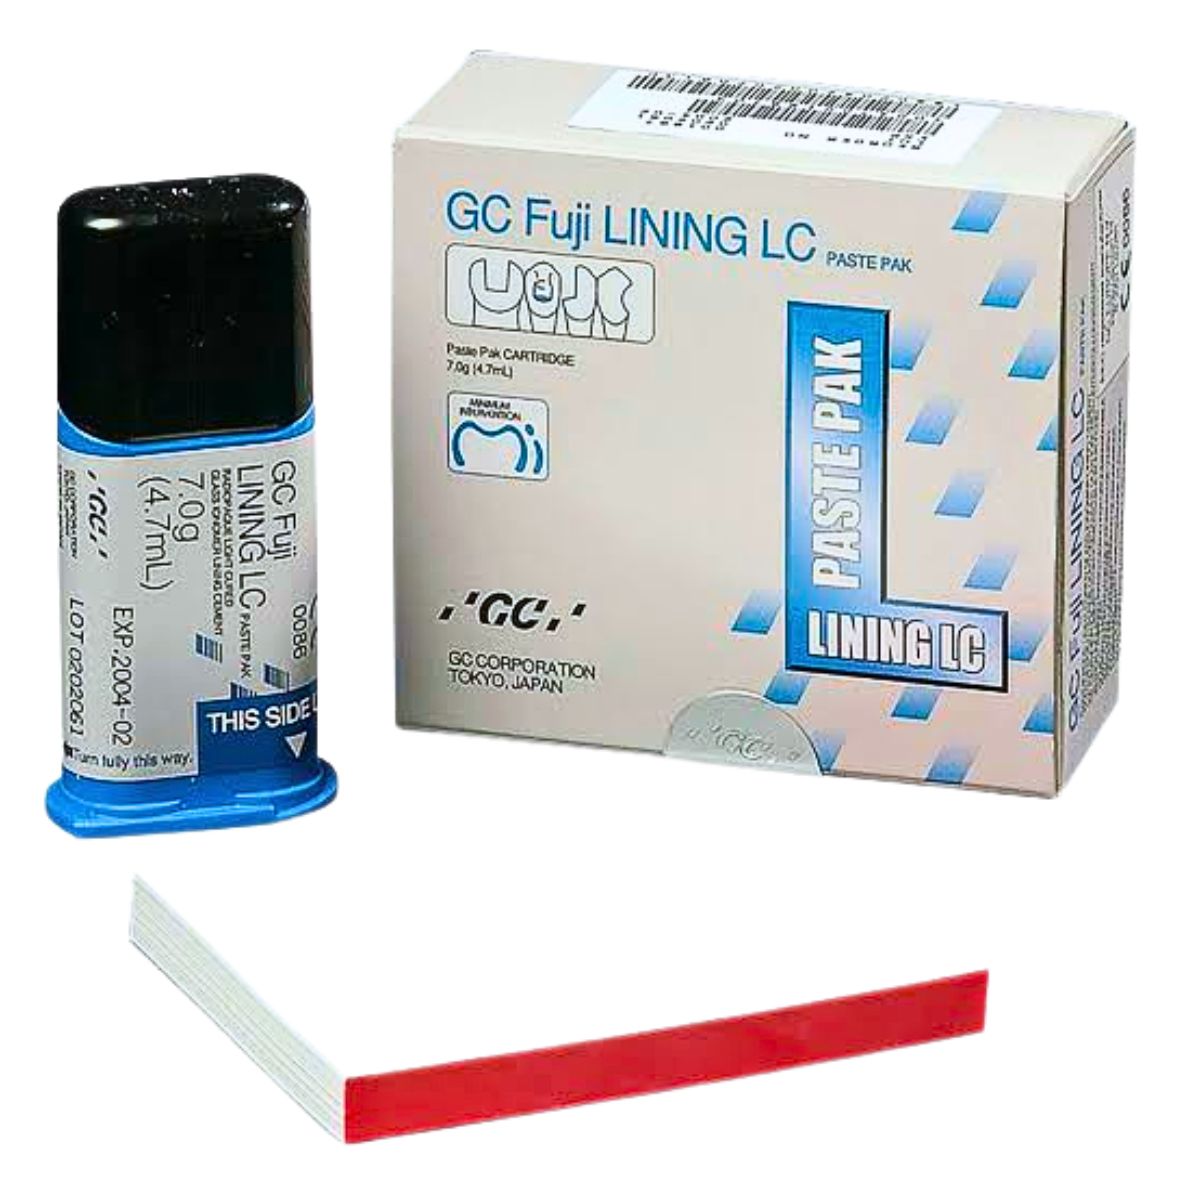 GC Fuji Lining LC Resin-Reinforced Glass Ionomer Material 7g